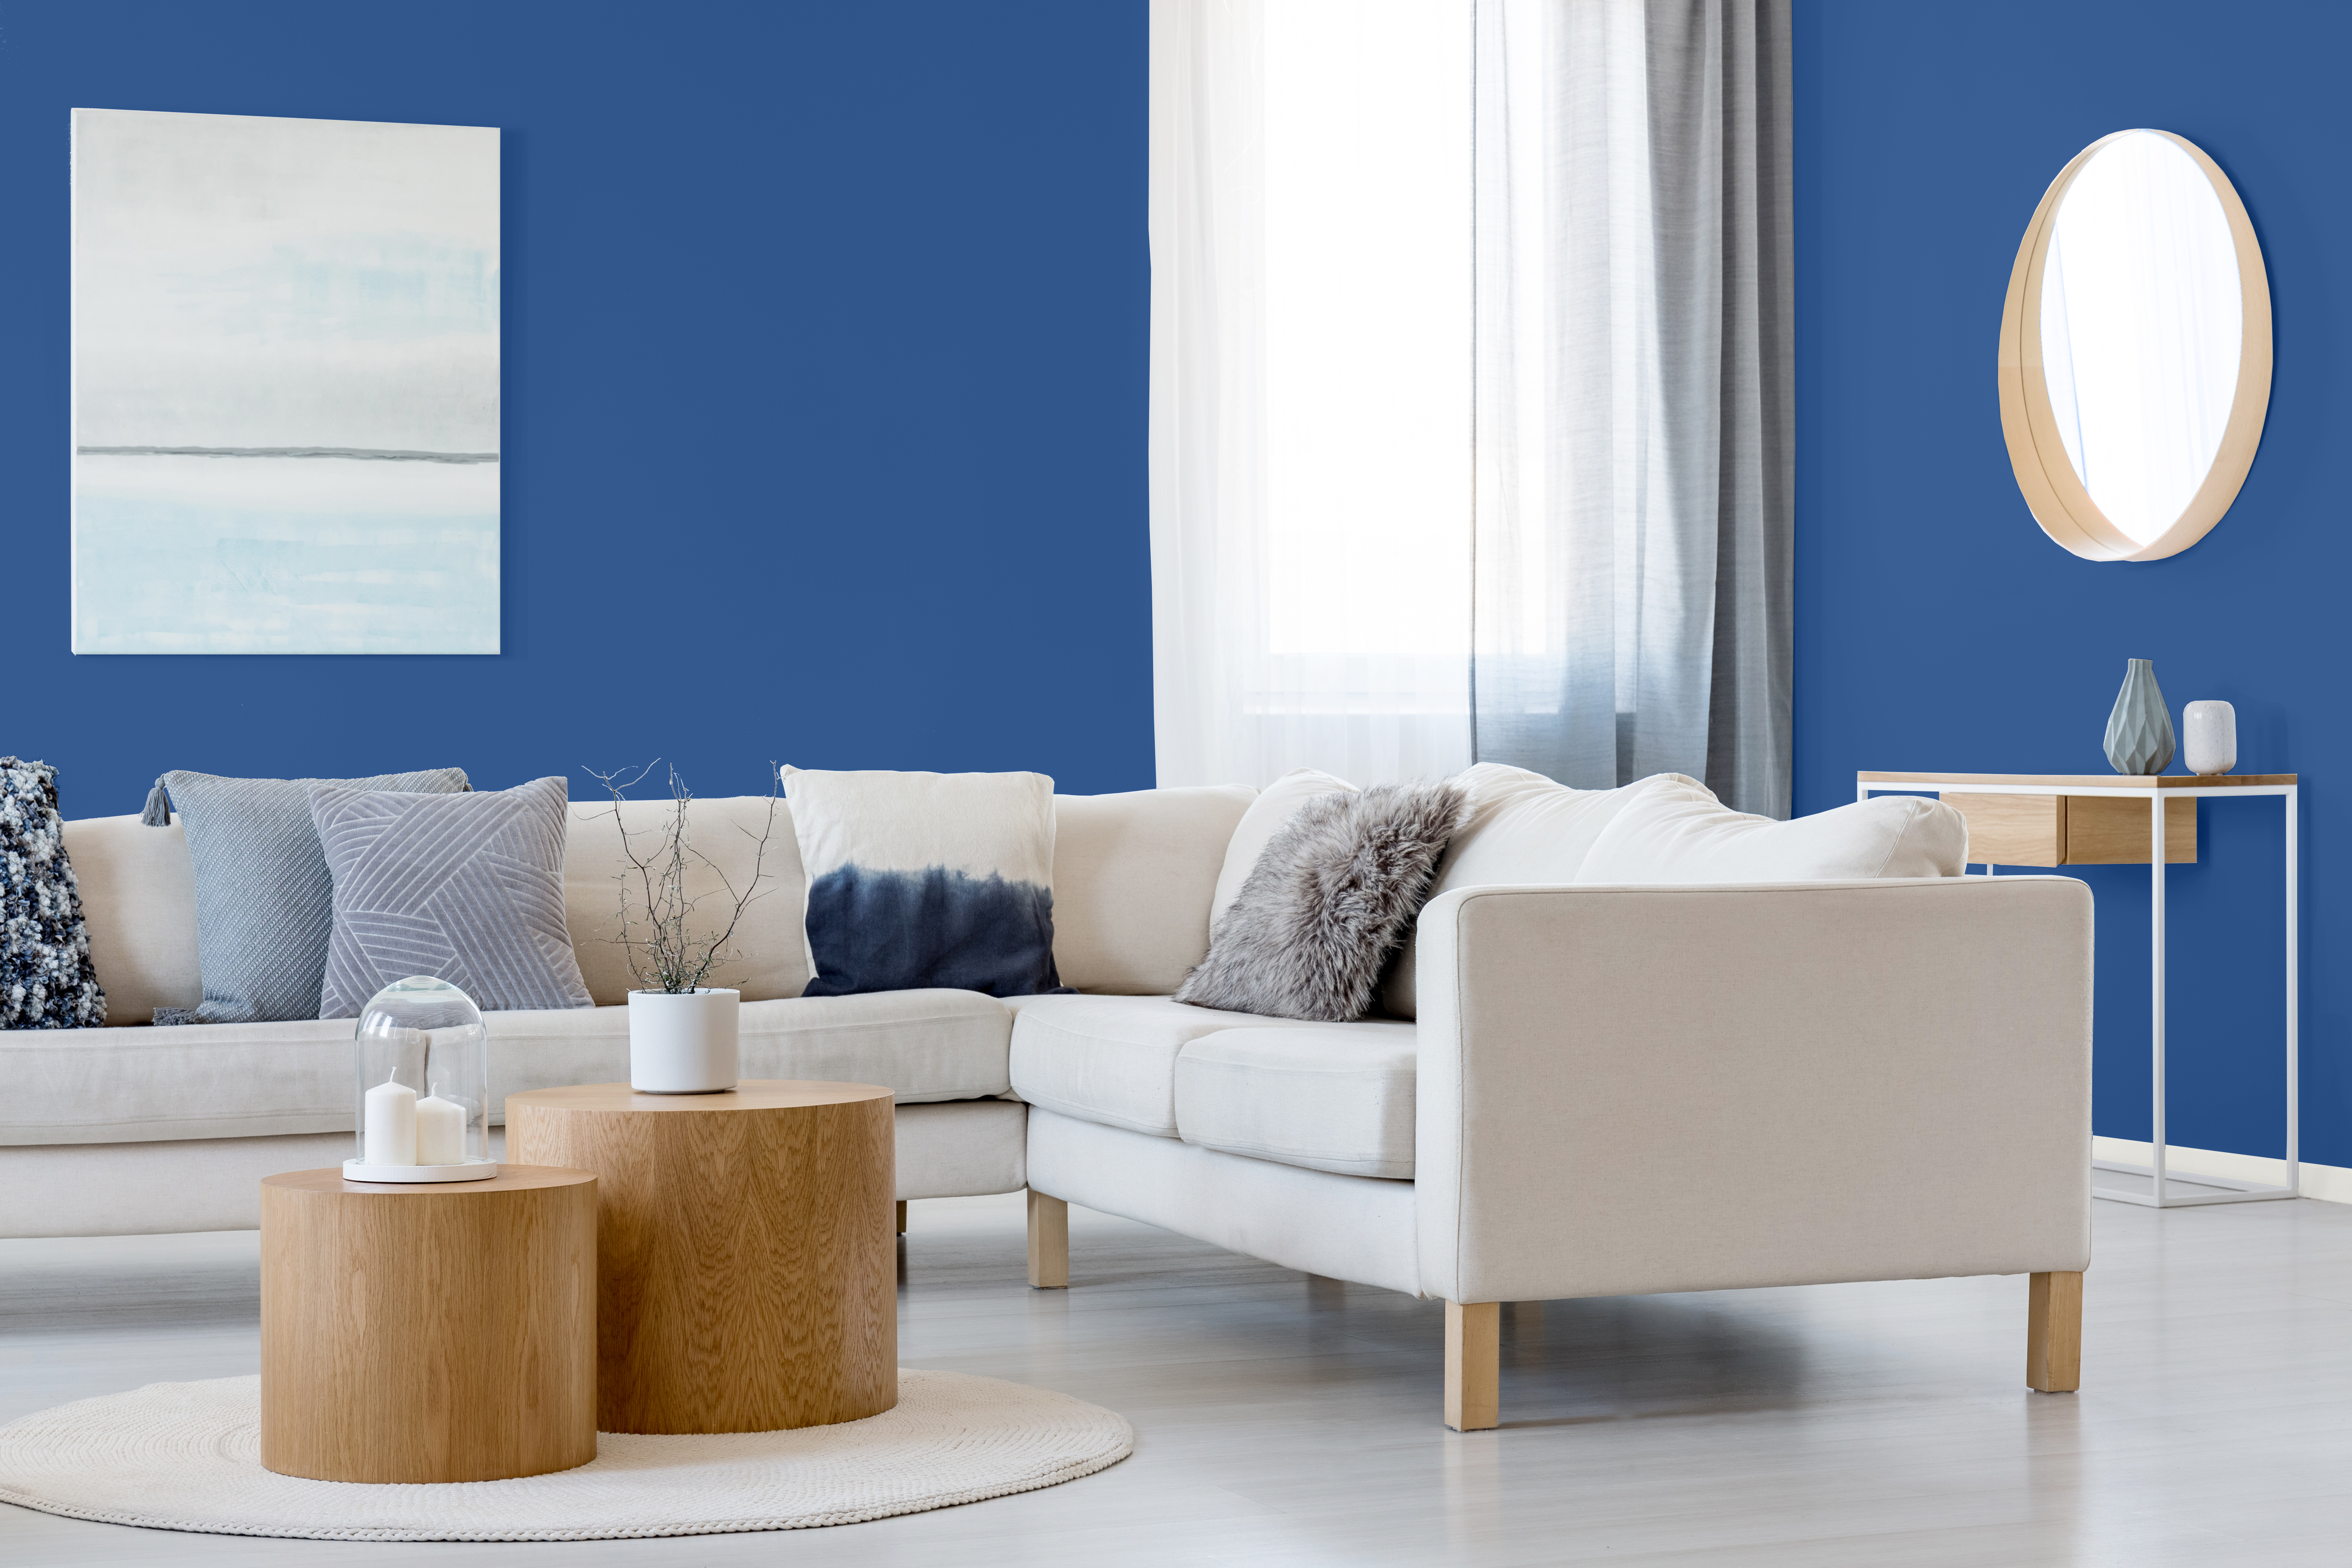 Blue and white abstract painting and mirror in wooden frame in elegant living room interior with corner sofa and coffee table.